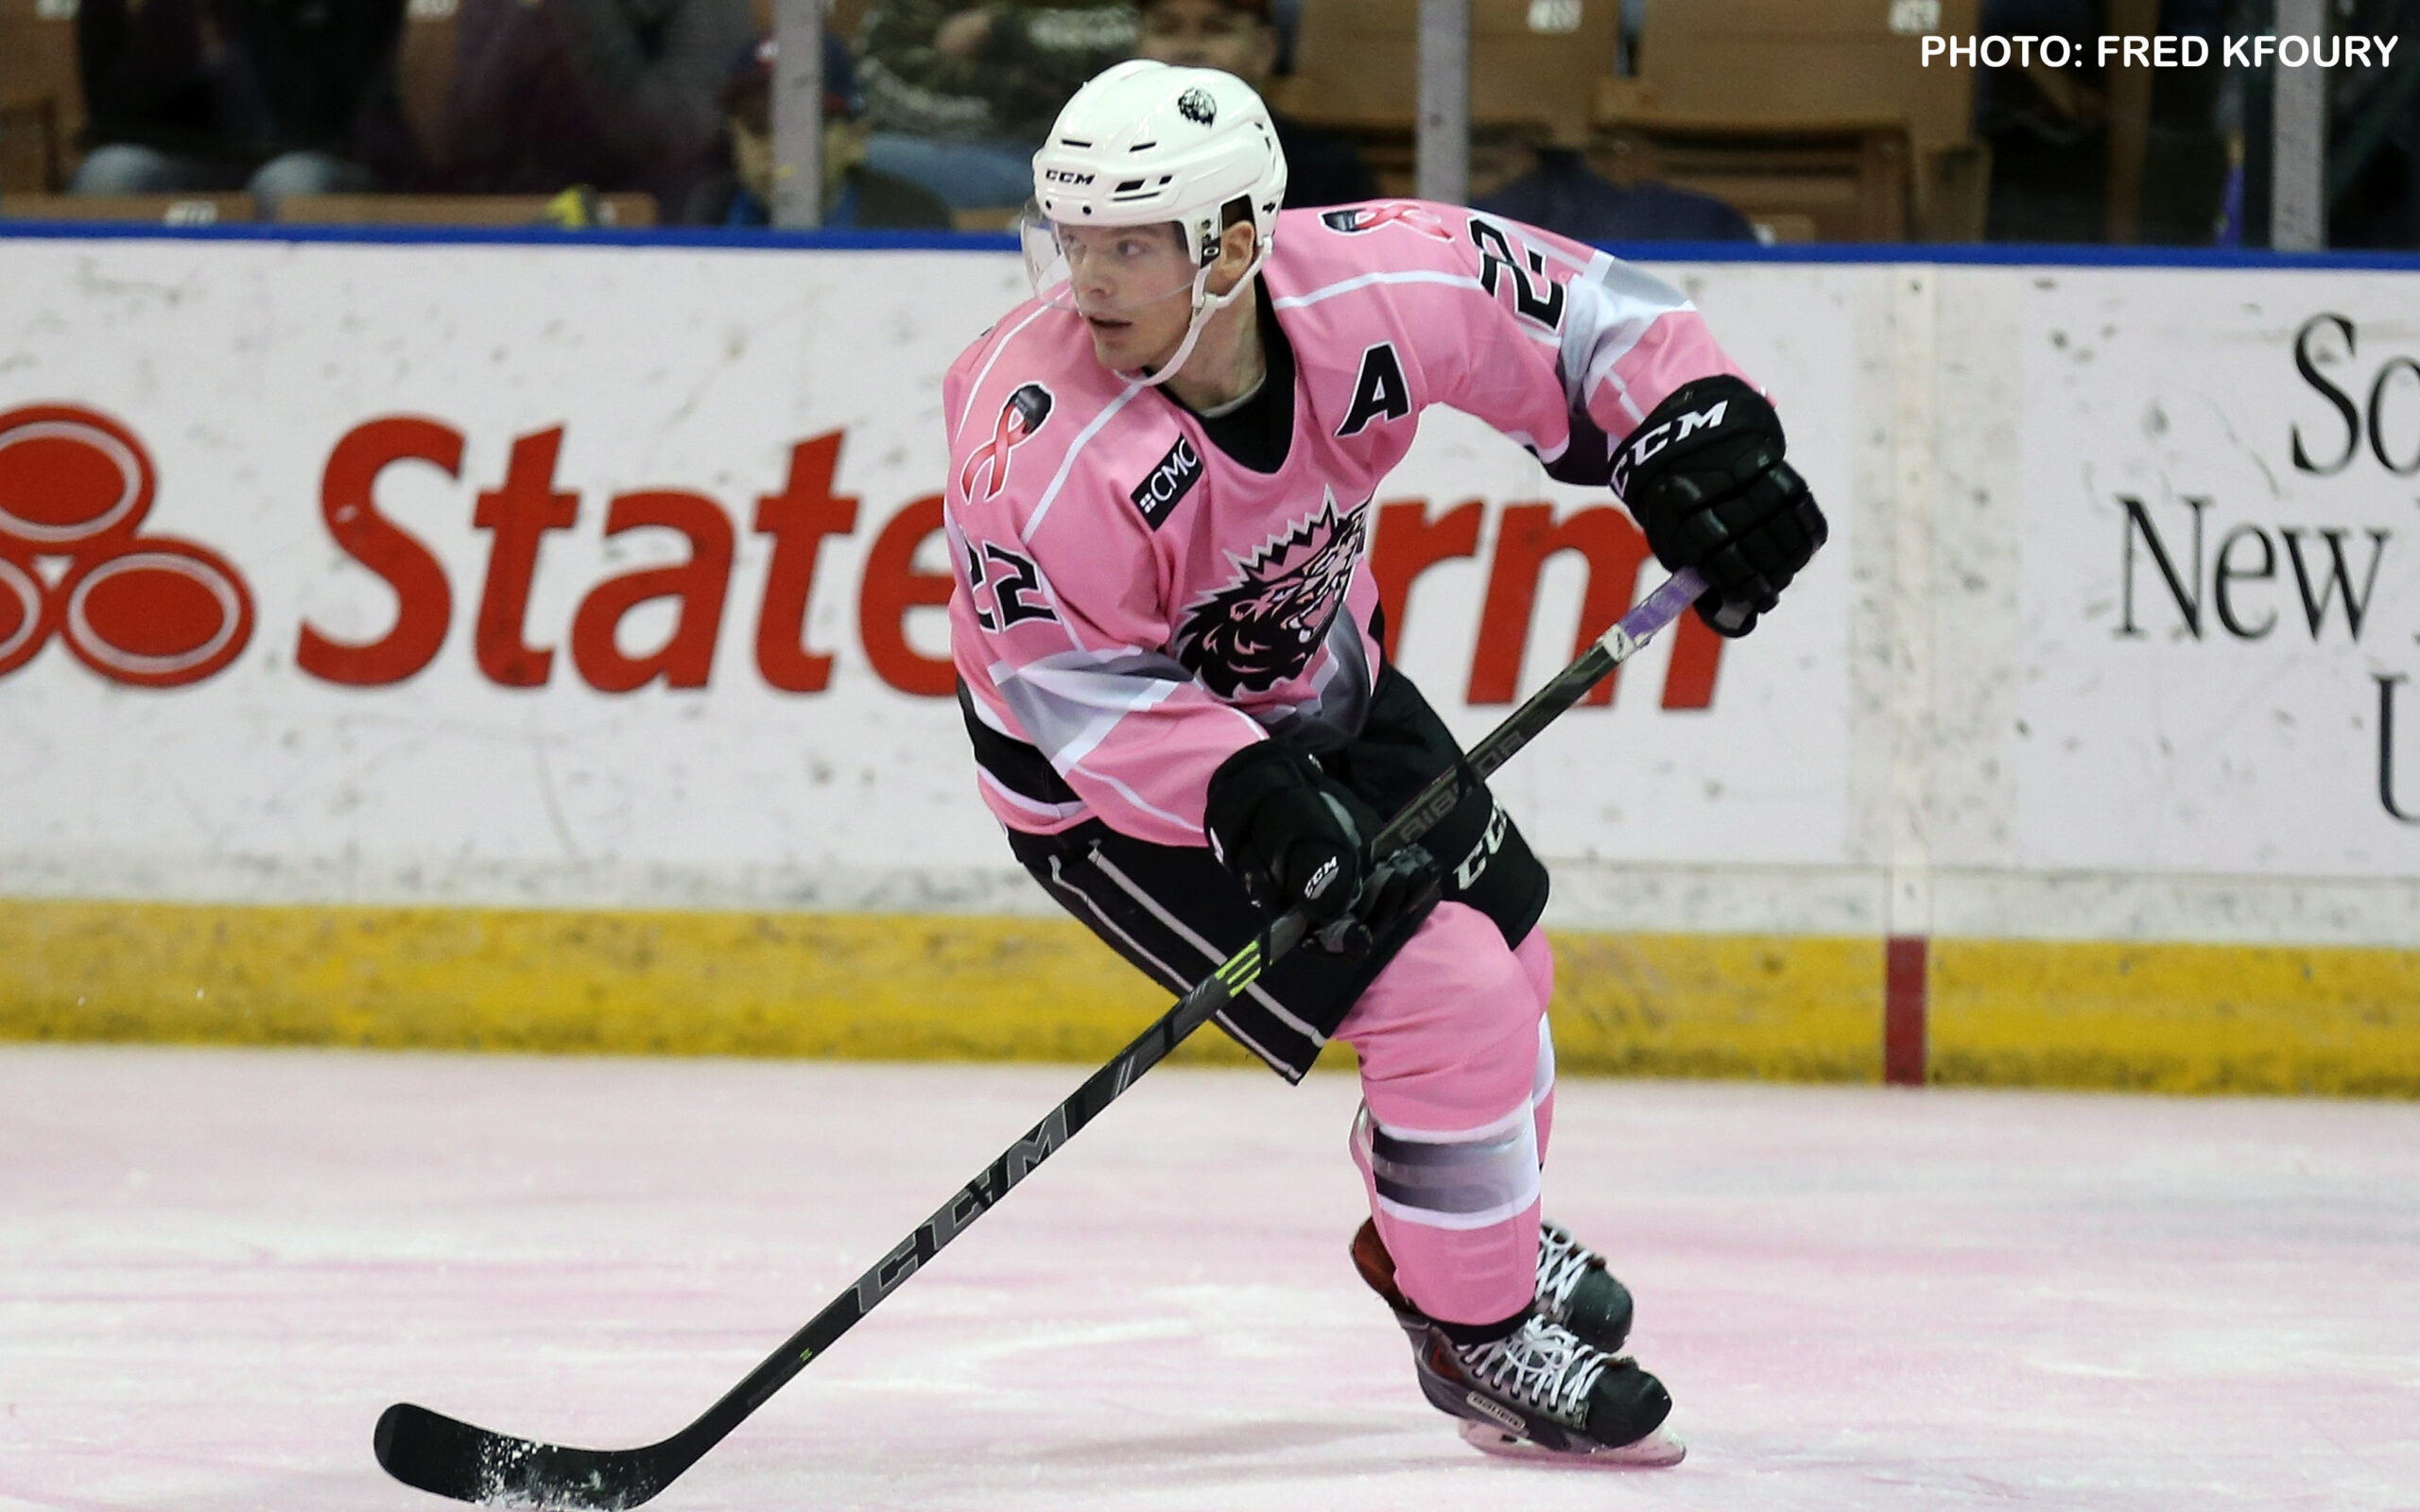 Monarchs Paint the Rink Pink with Victory